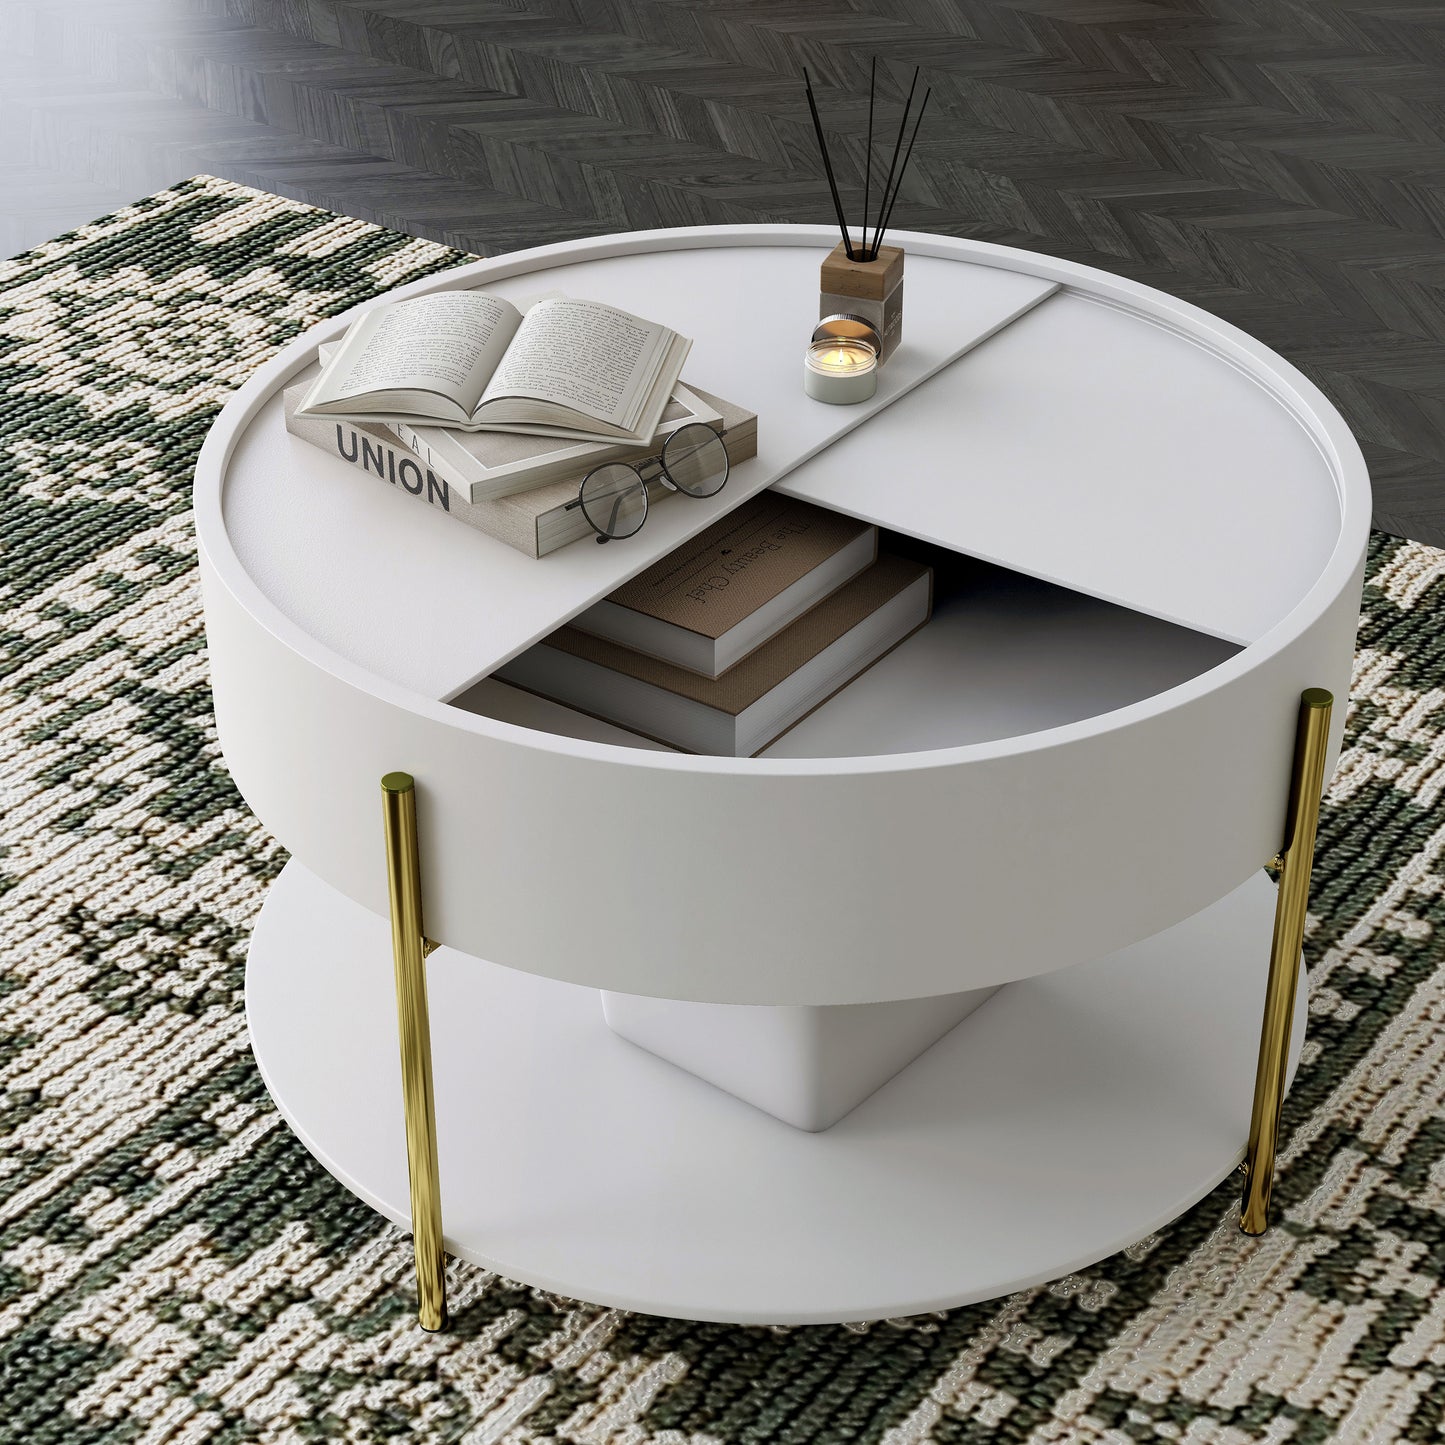 Angled modern white and gold round storage coffee table with top partially open in a living room with accessories